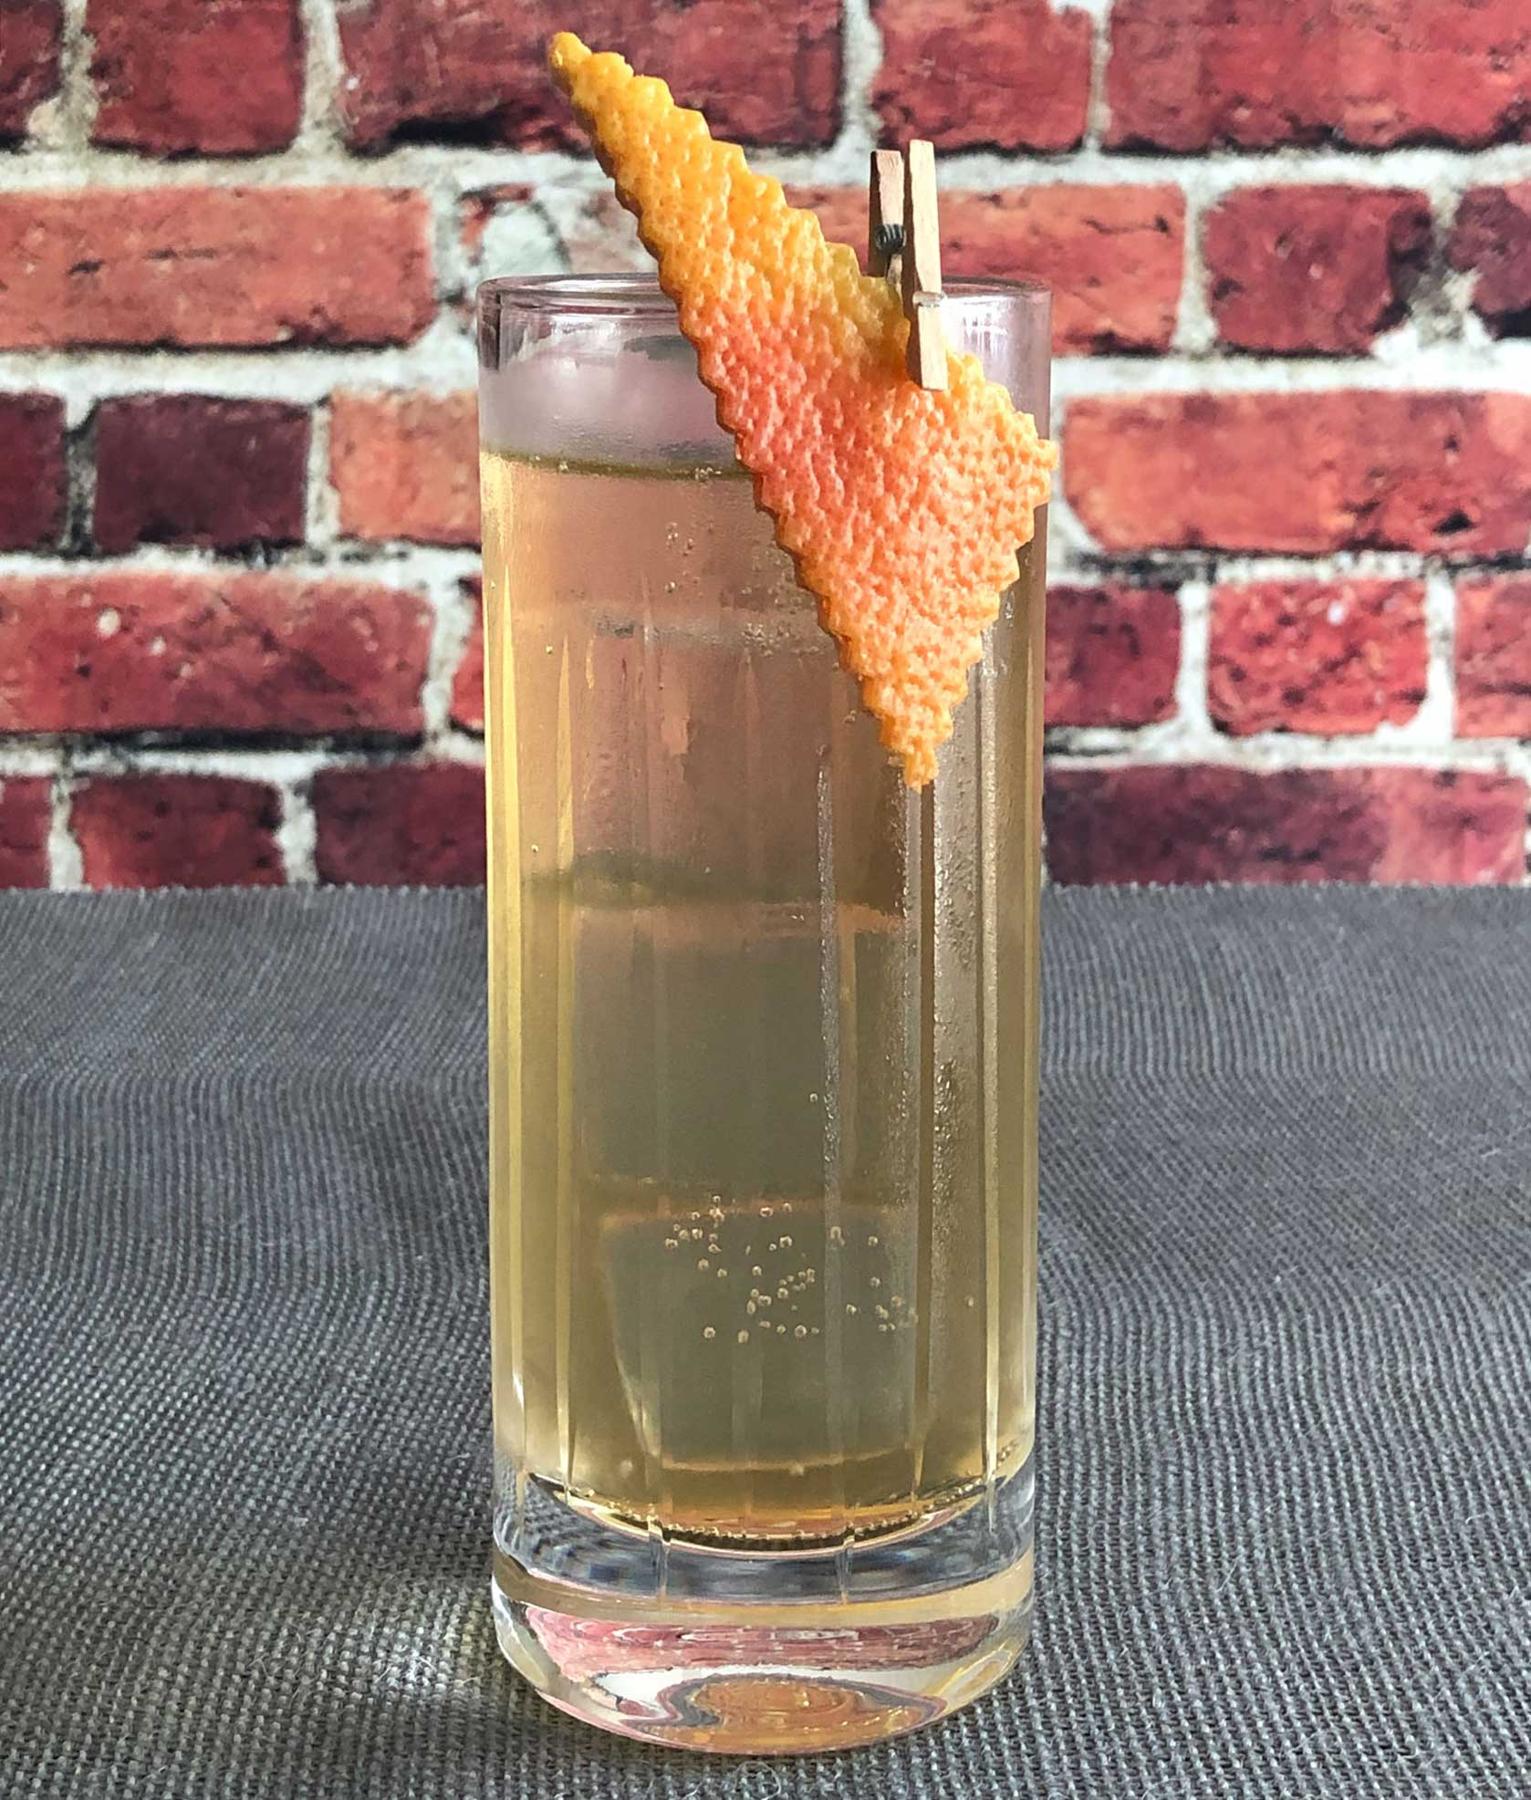 An example of the Kina Préparé, the mixed drink (drink) featuring soda water, Mattei Cap Corse Blanc Quinquina, Amaro Alta Verde, soda water, and grapefruit twist; photo by Lee Edwards